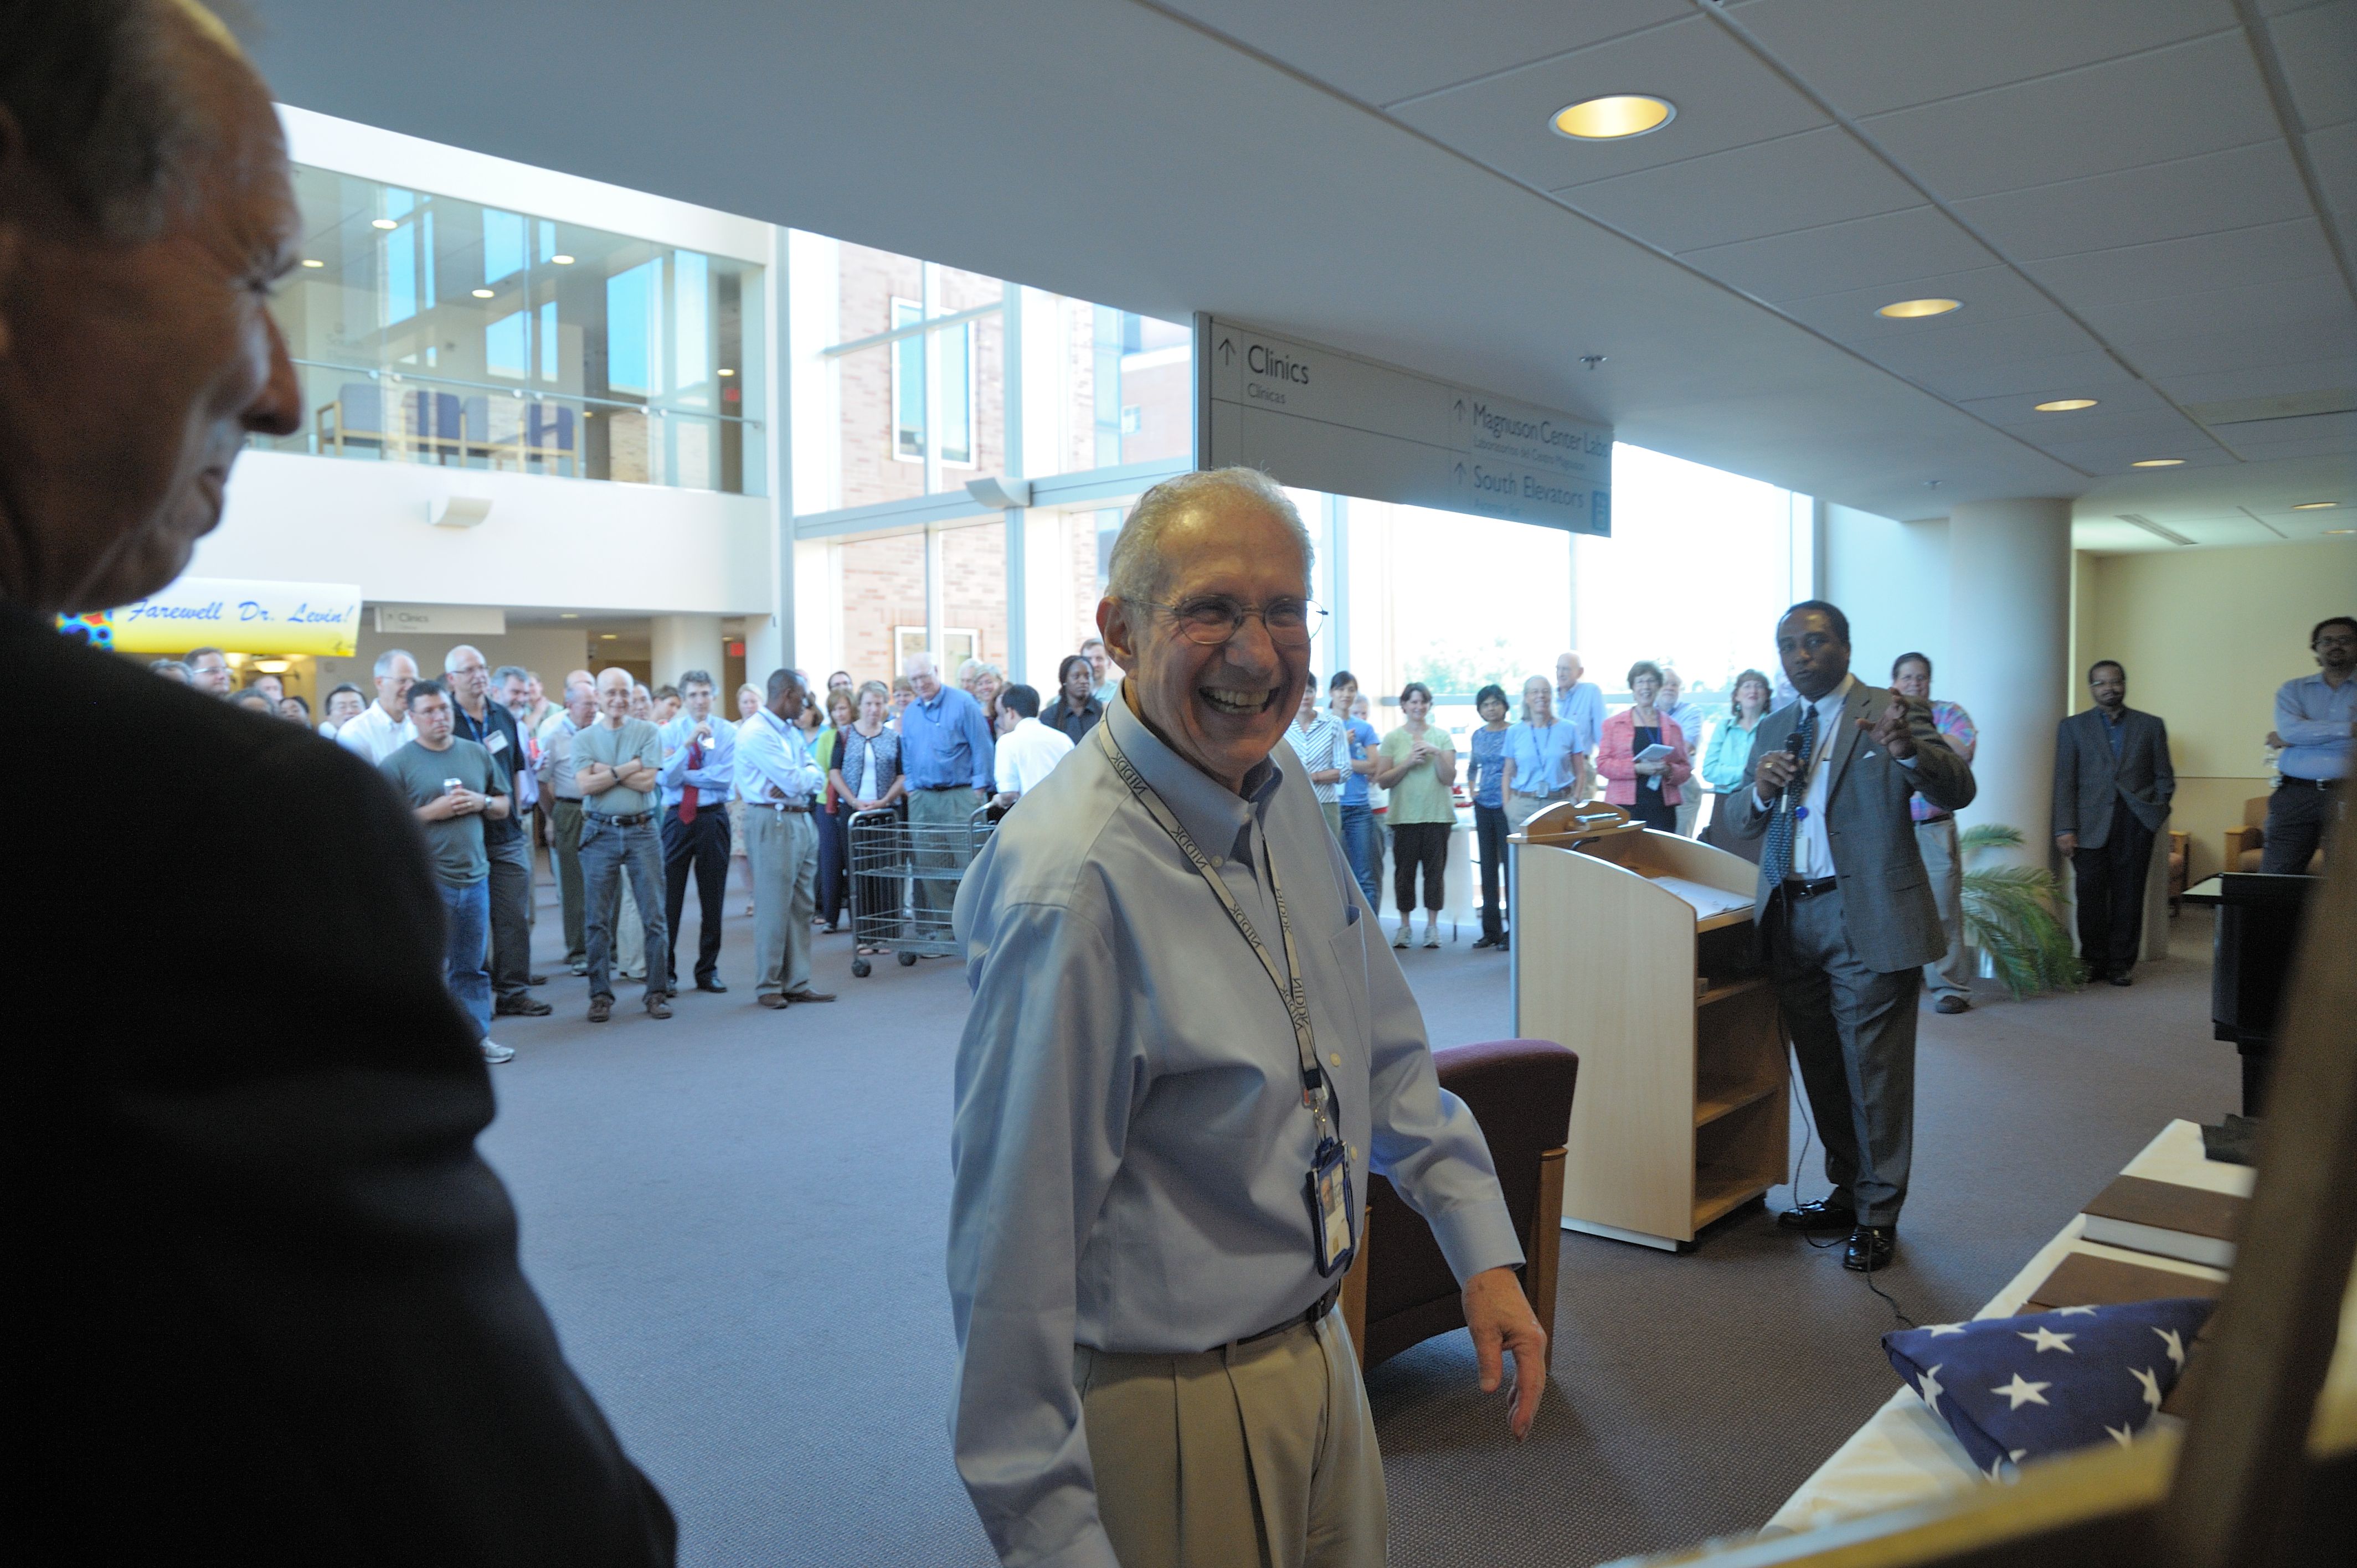 NIDDK Scientific Director Dr. Ira Levin (center) is honored by NIDDK Director Dr. Griffin P. Rodgers (at podium) at a celebration in honor of Levin's retirement after 48 years of government service.